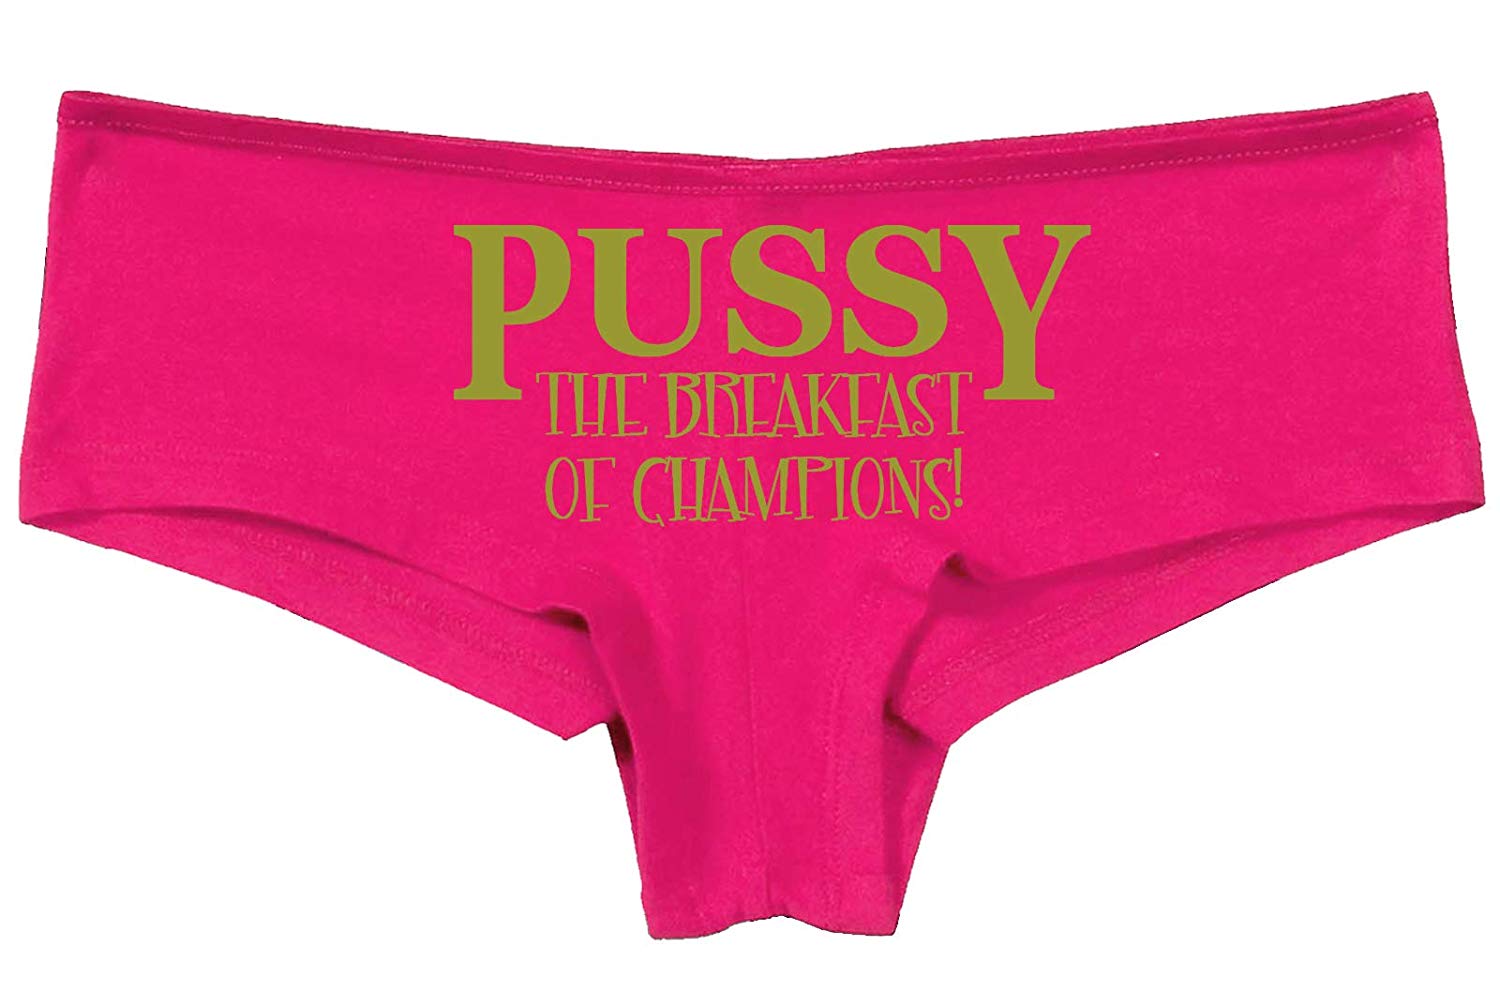 Knaughty Knickers Pussy The Breakfast Of Champions Oral Sex Flirty Pin Cat House Riot